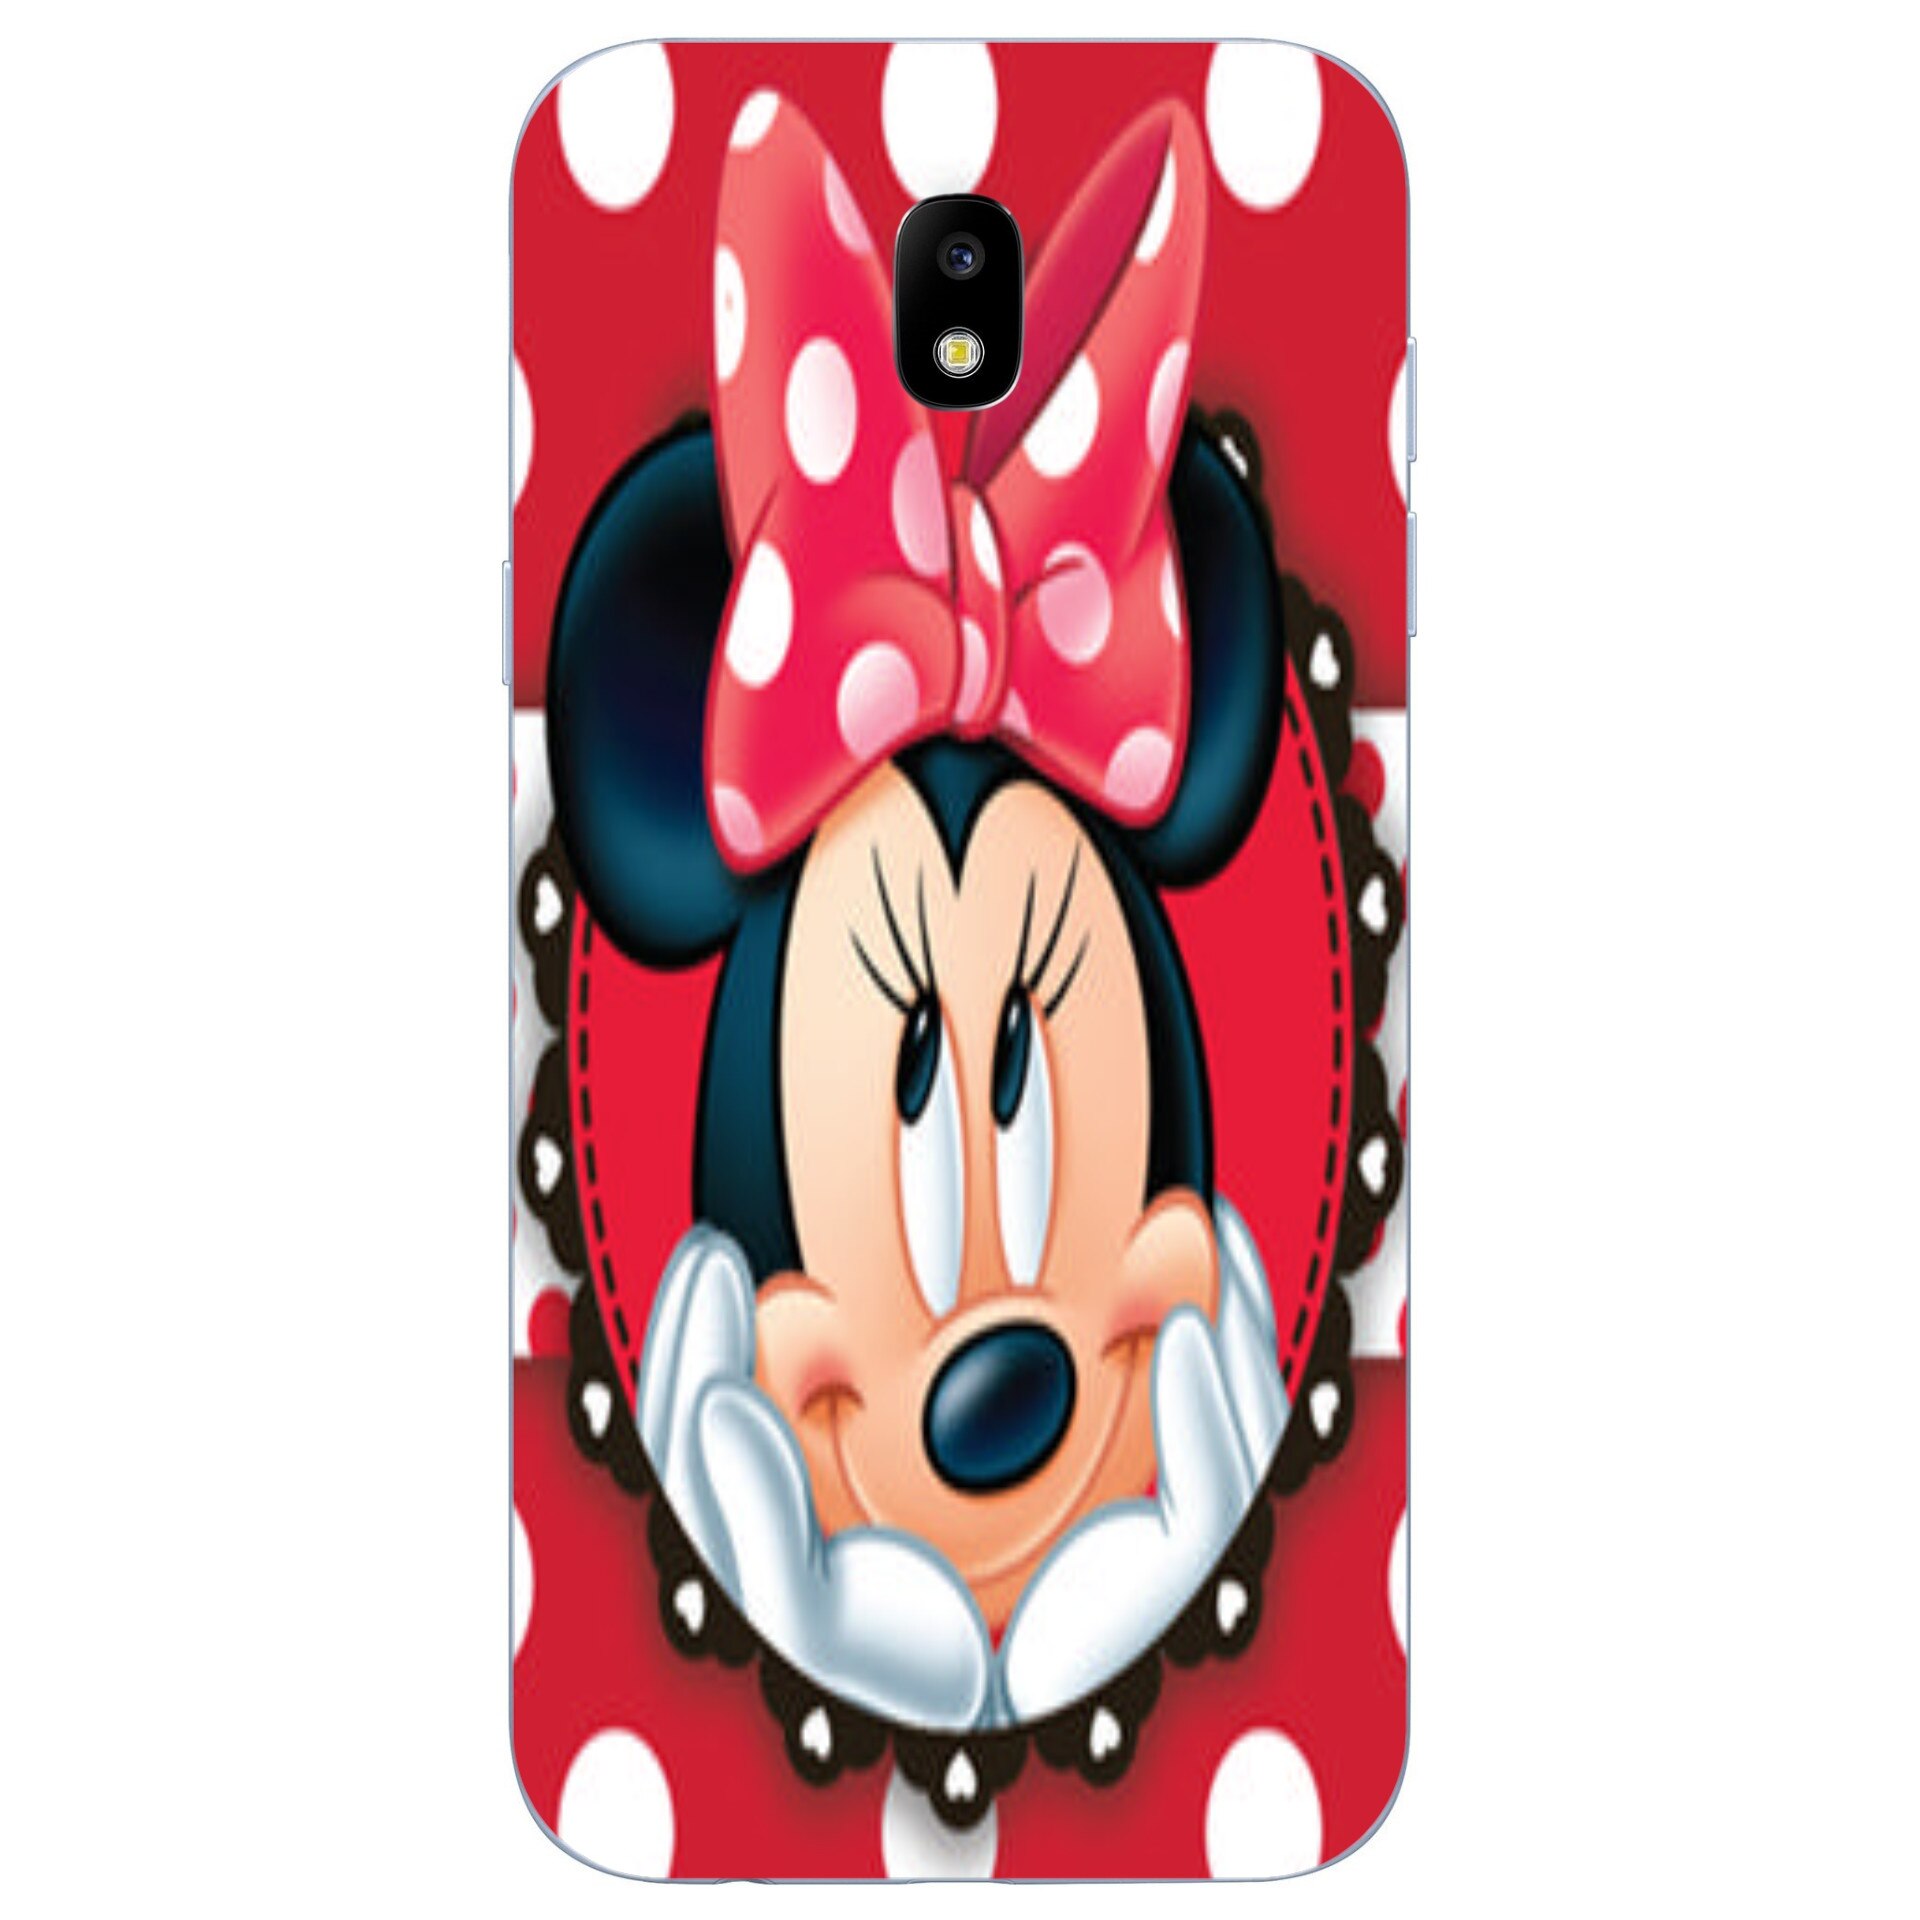 St Smoothly Infectious disease Husa Samsung J5 2017, Minnie Mouse - eMAG.ro